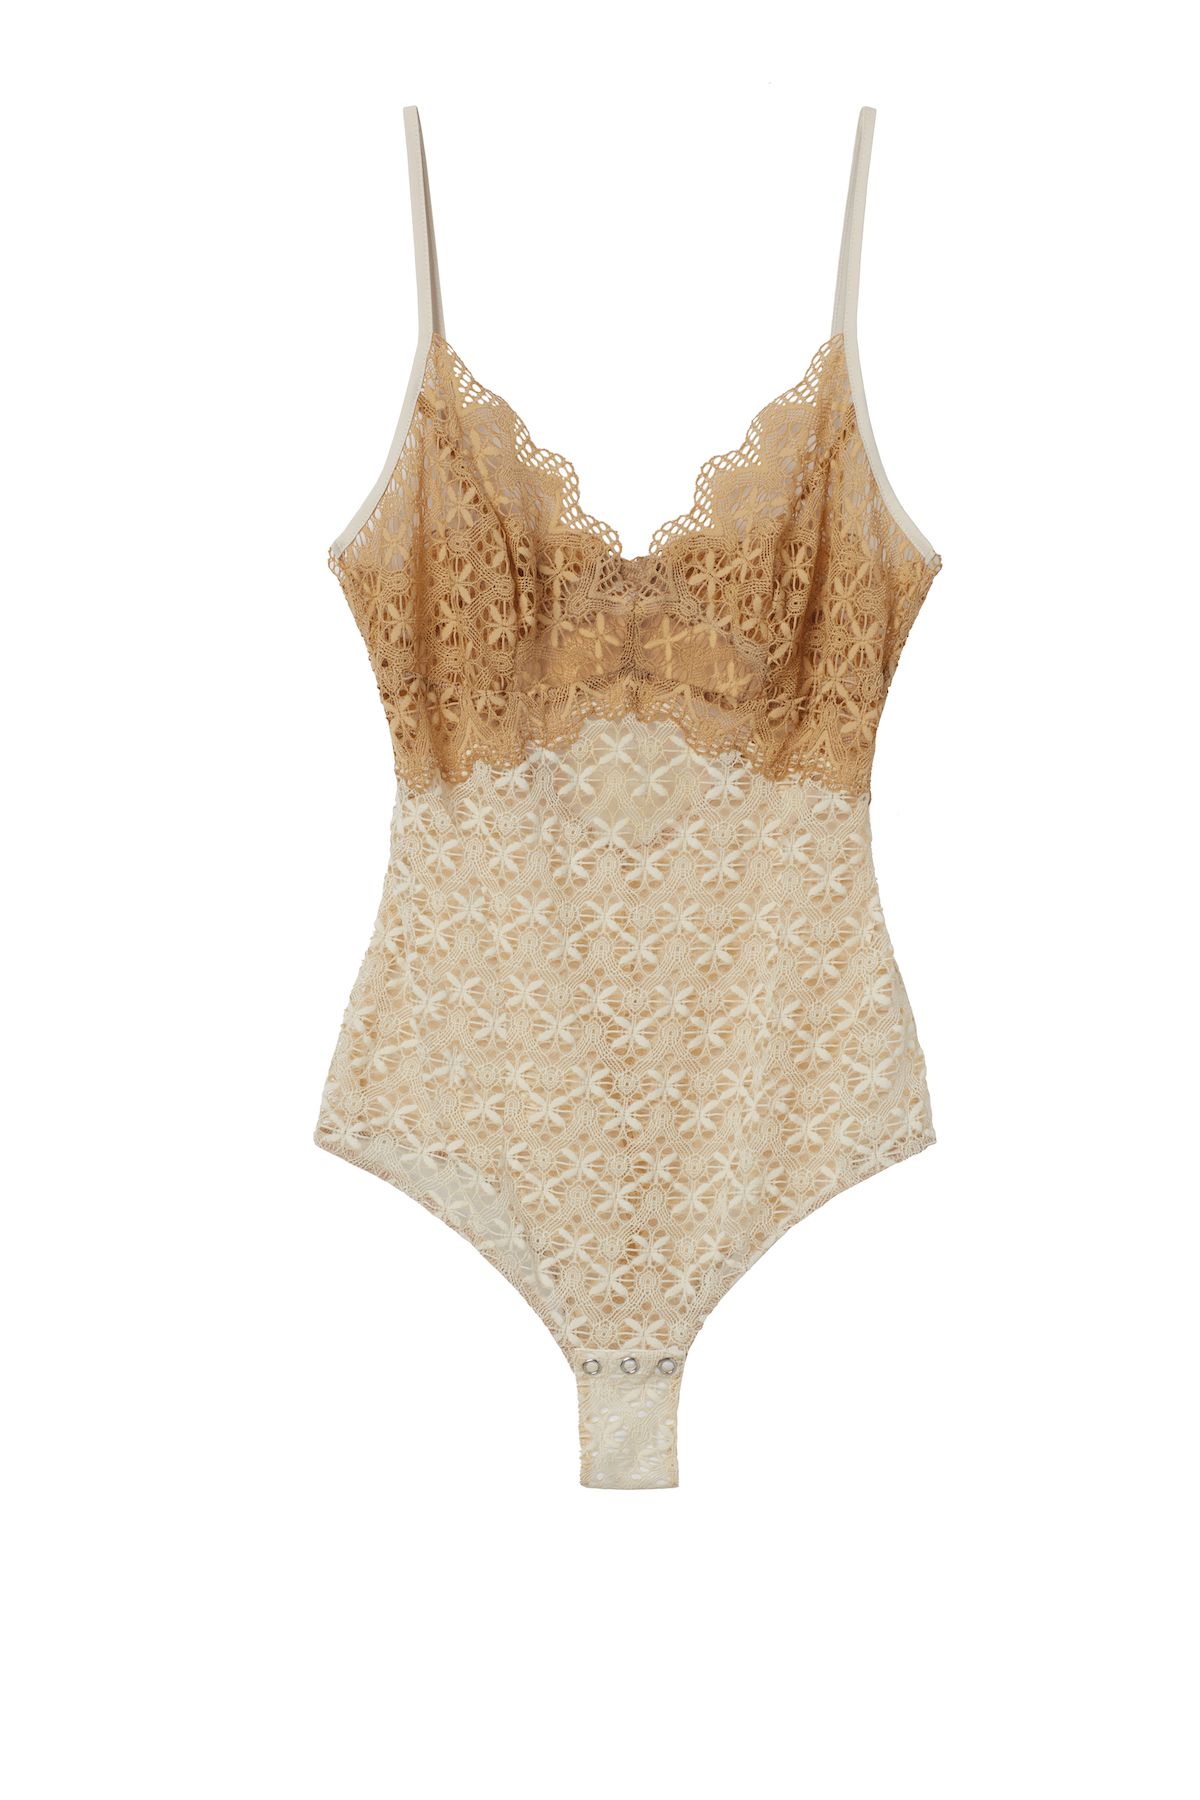 Intimissimi presents new Lace Bra Top with Lycra lace